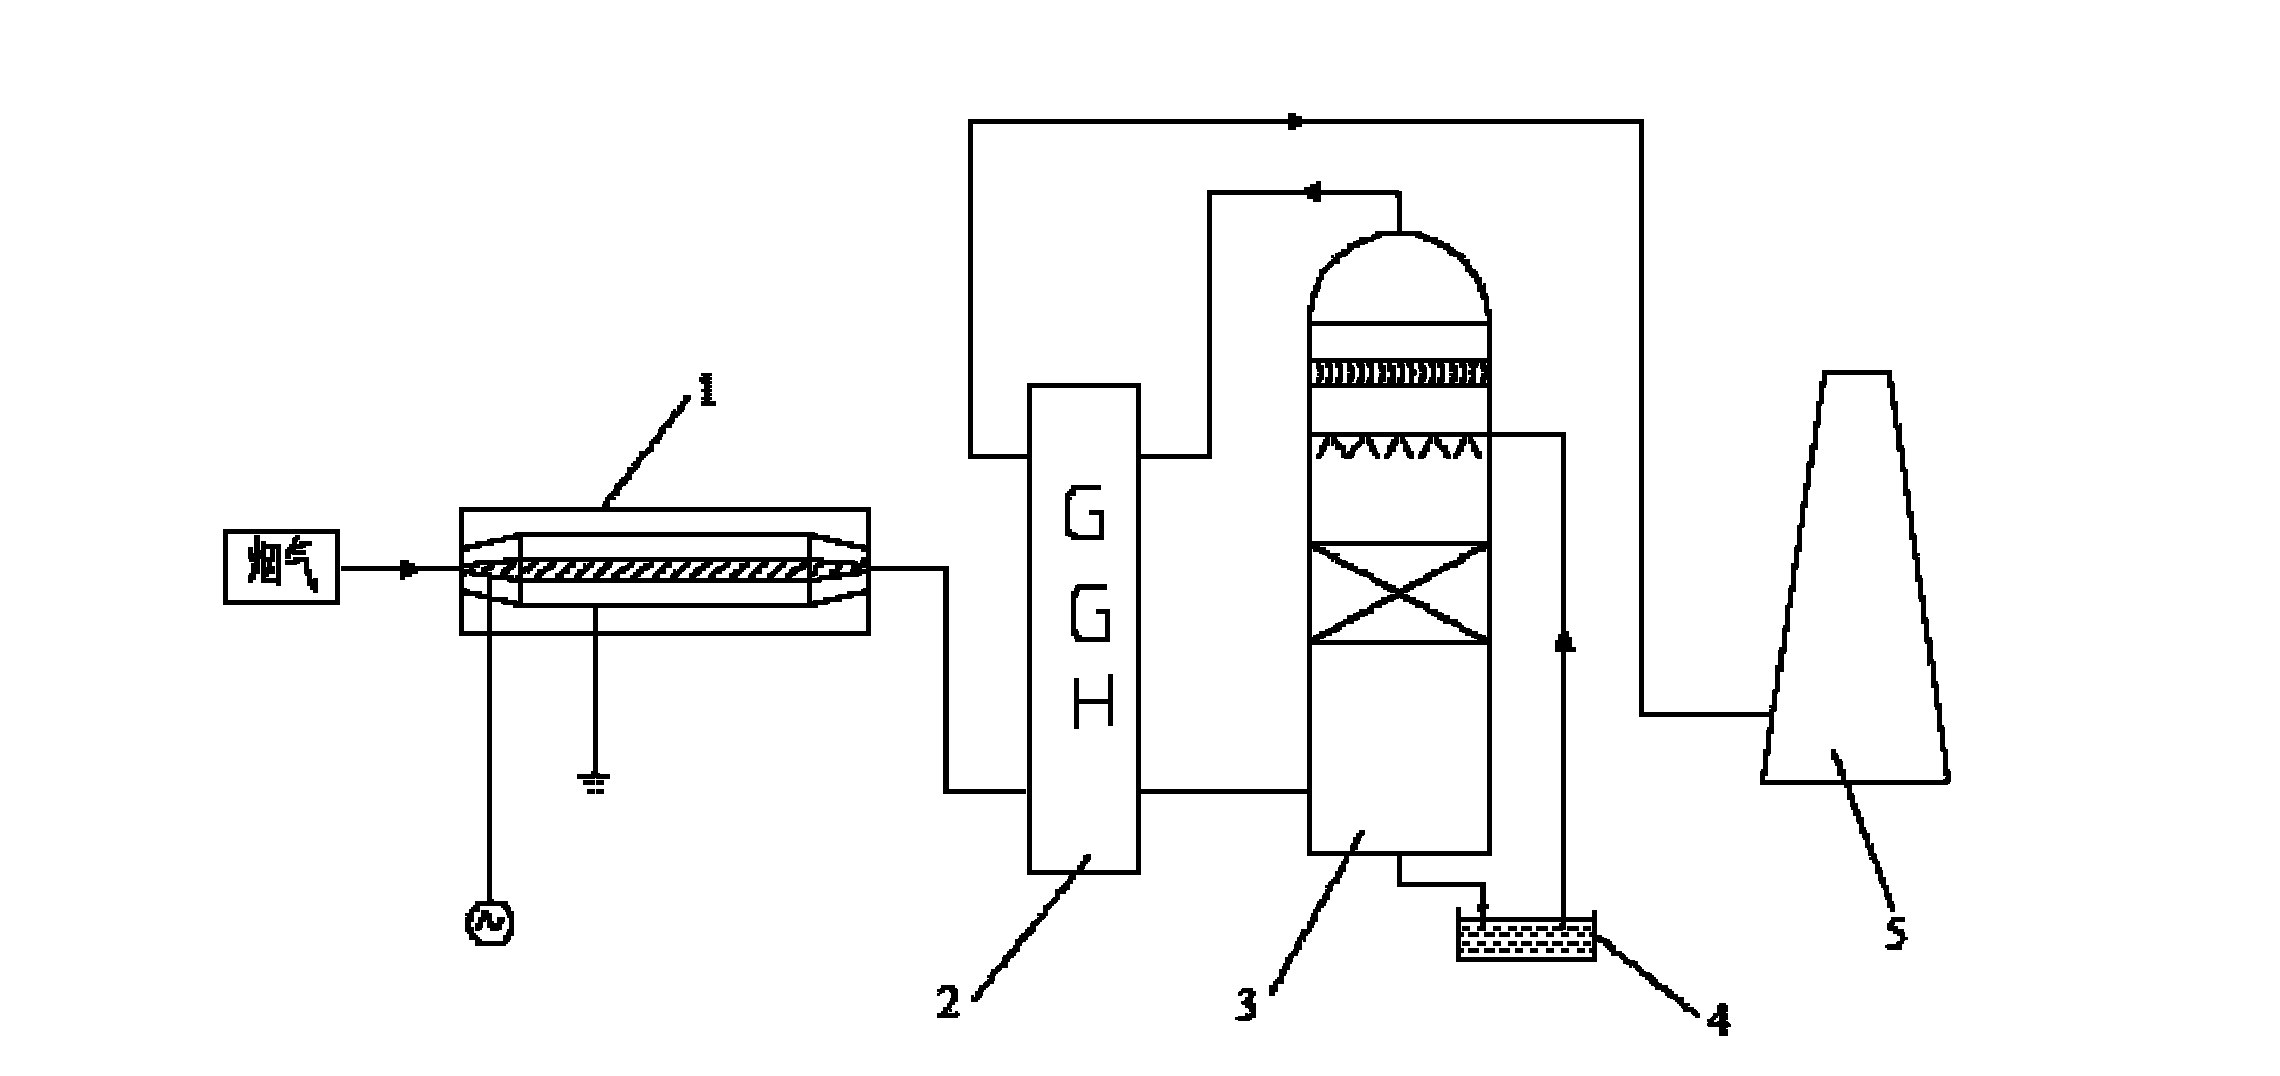 Smoke desulfuration and denitration system absorbed by dielectric barrier discharge combined lye and process thereof